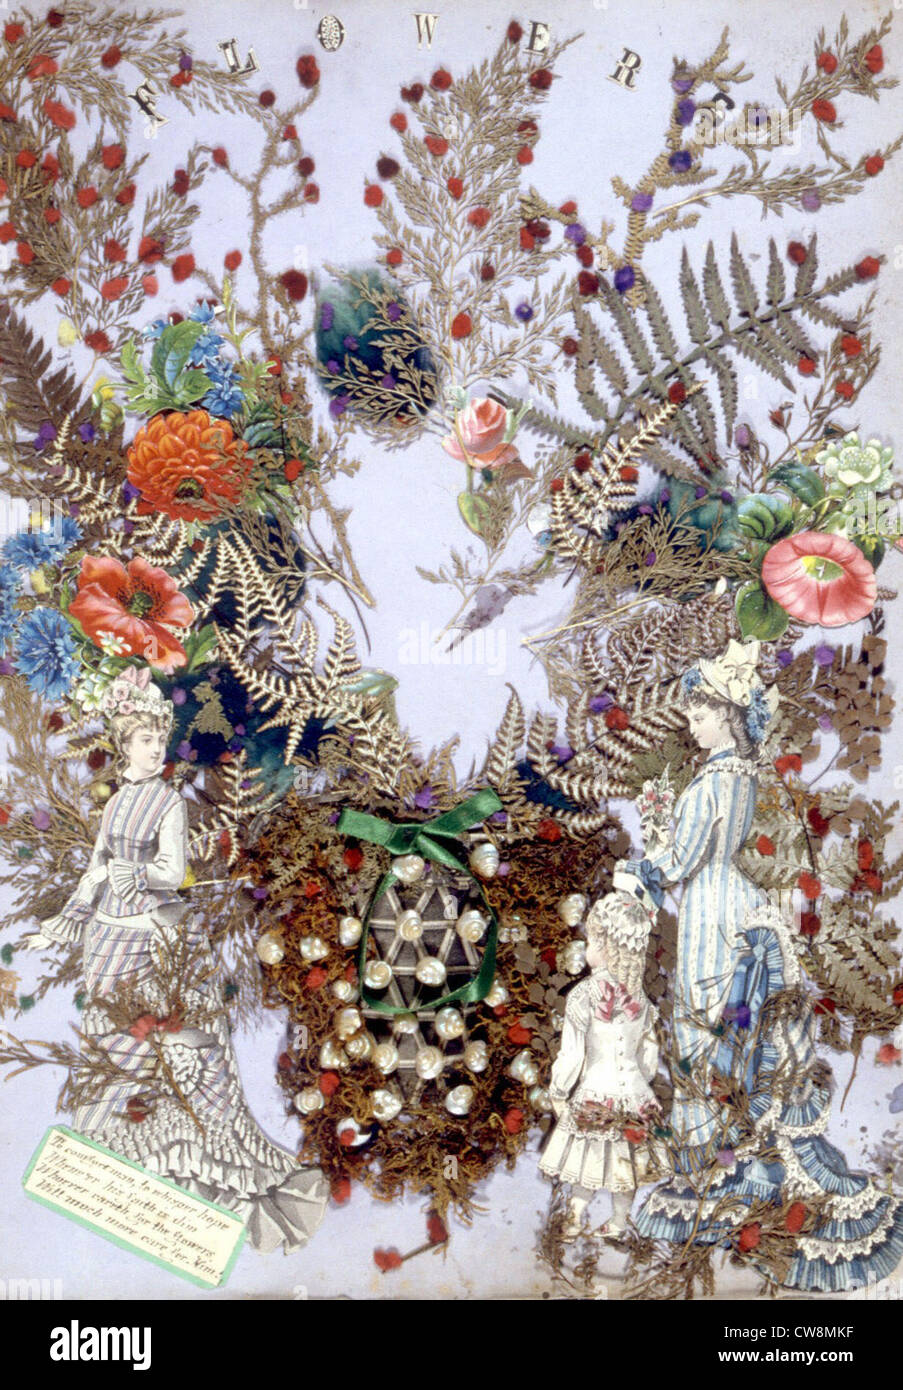 Herbier, illustration from the late 19th century Stock Photo